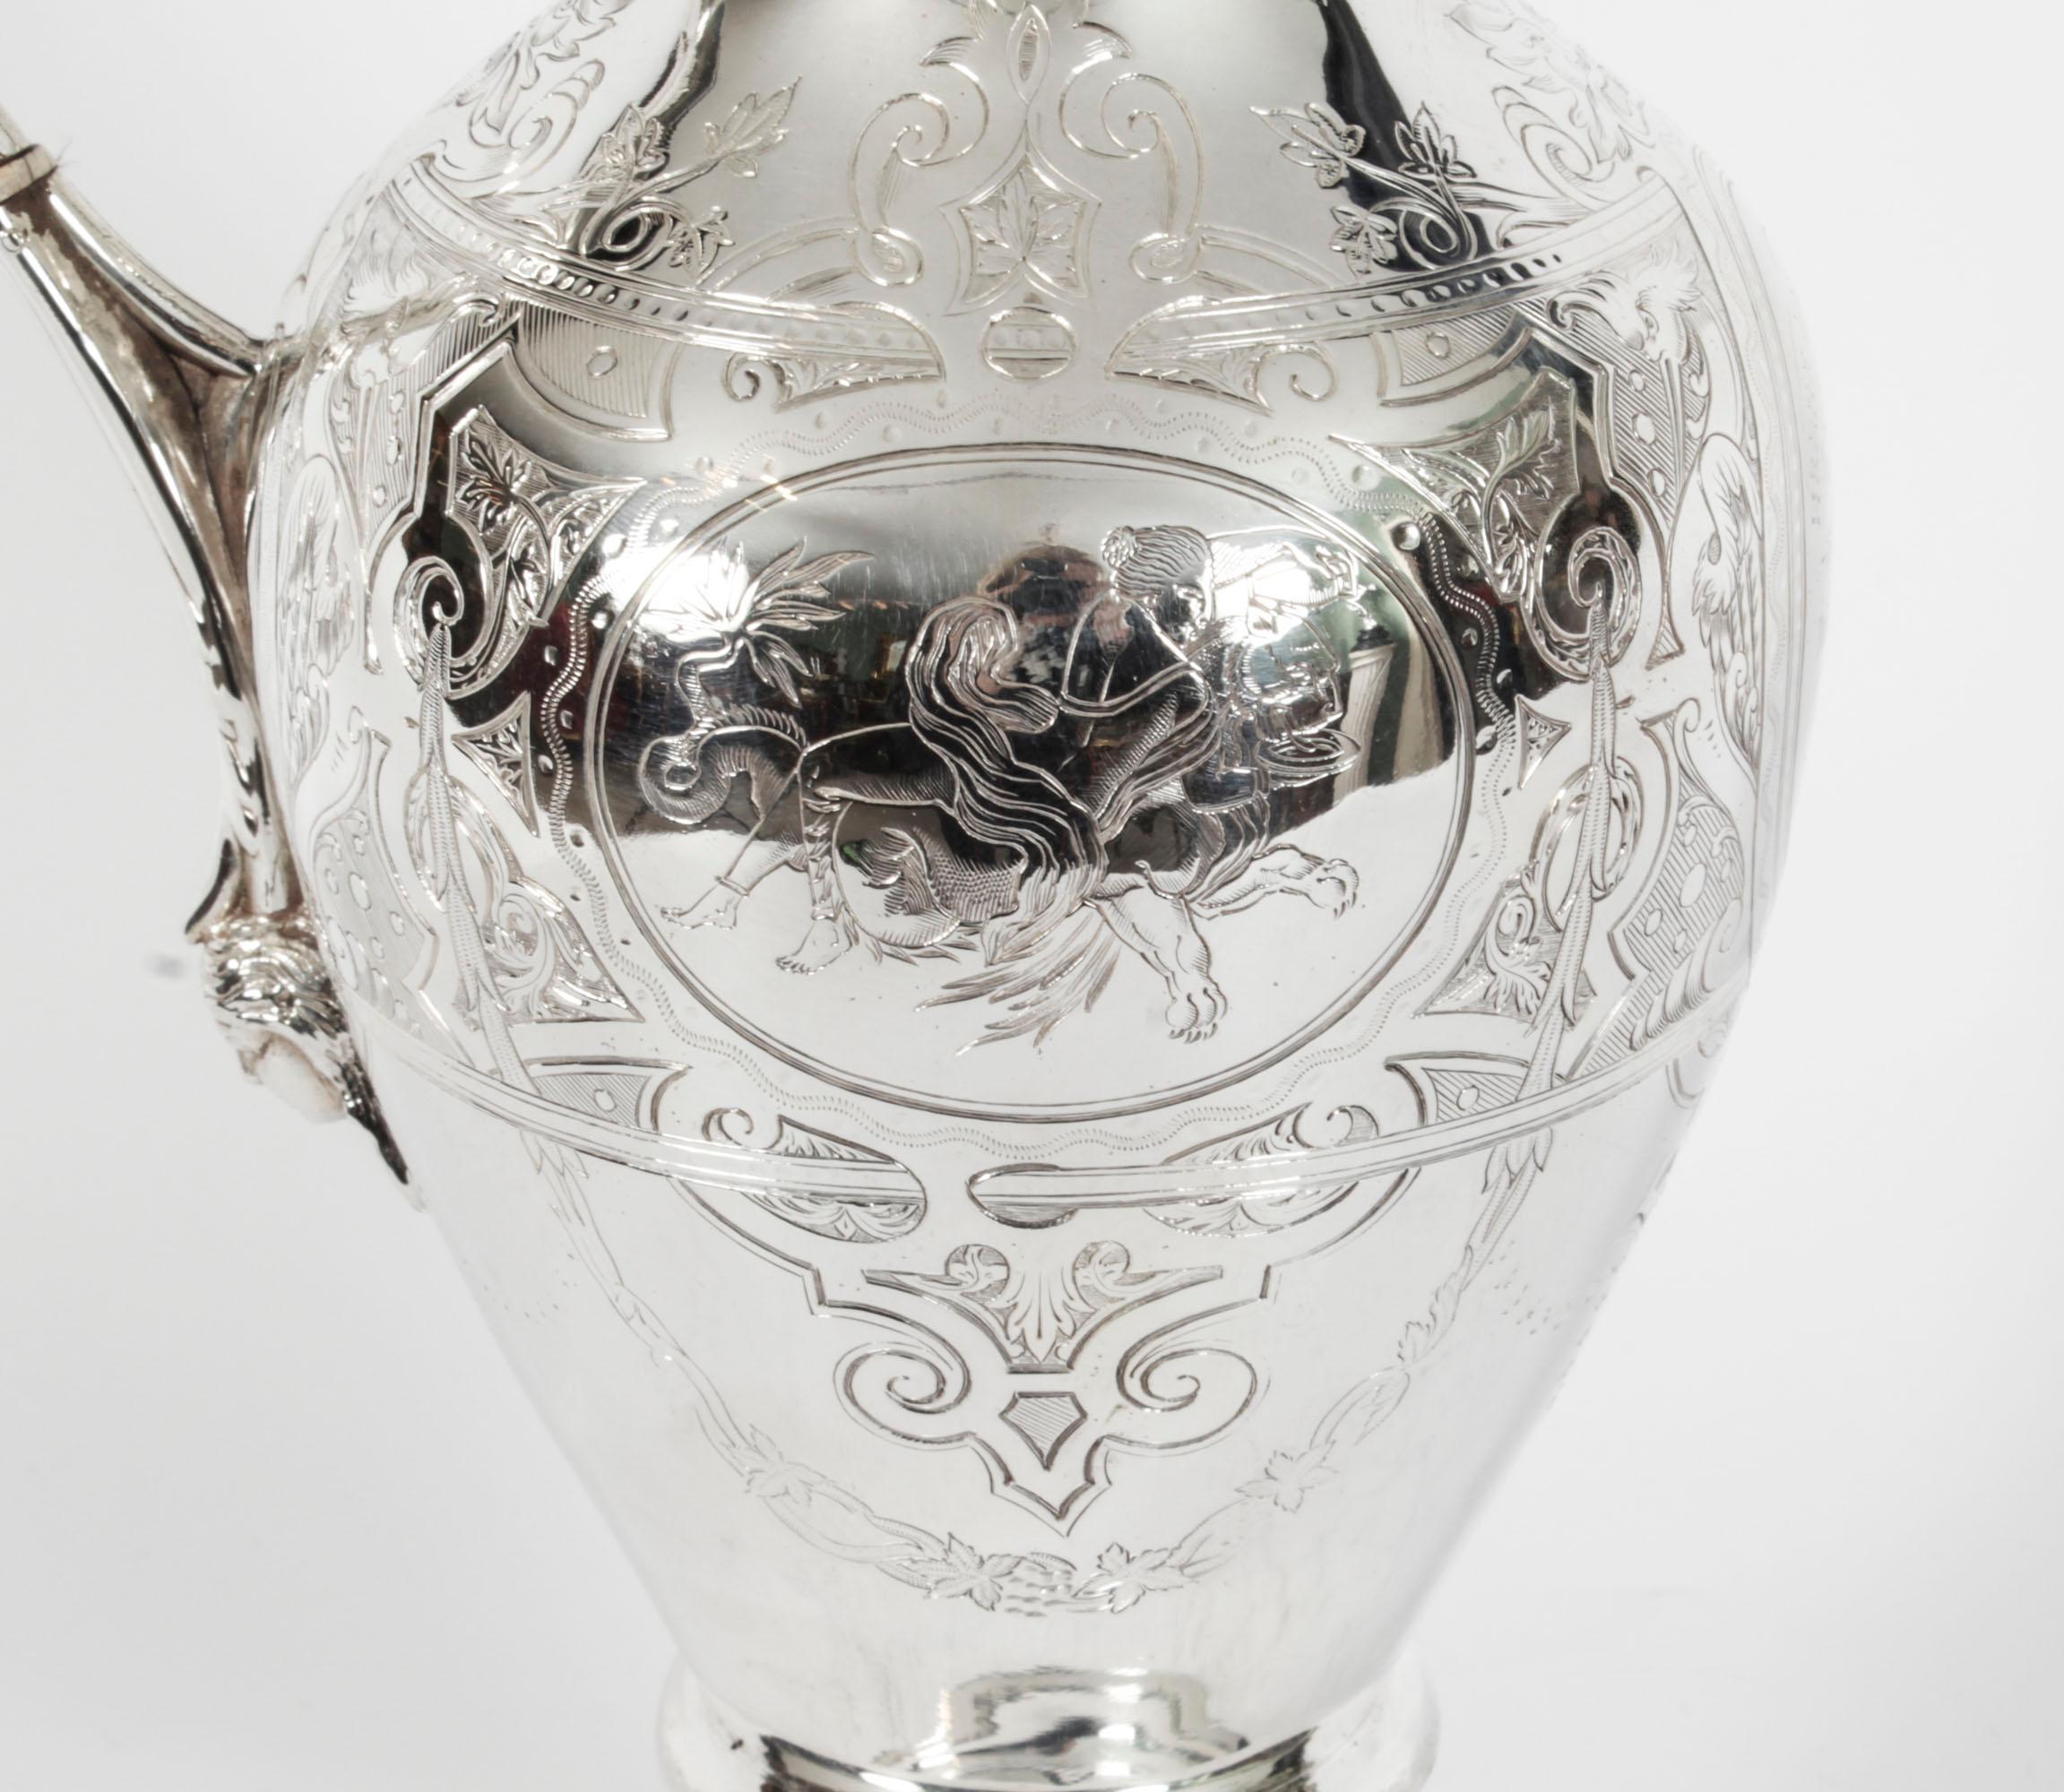 English Antique Silver Plated Claret Wine Jug Yacht Race 1st Prize, 19th Century